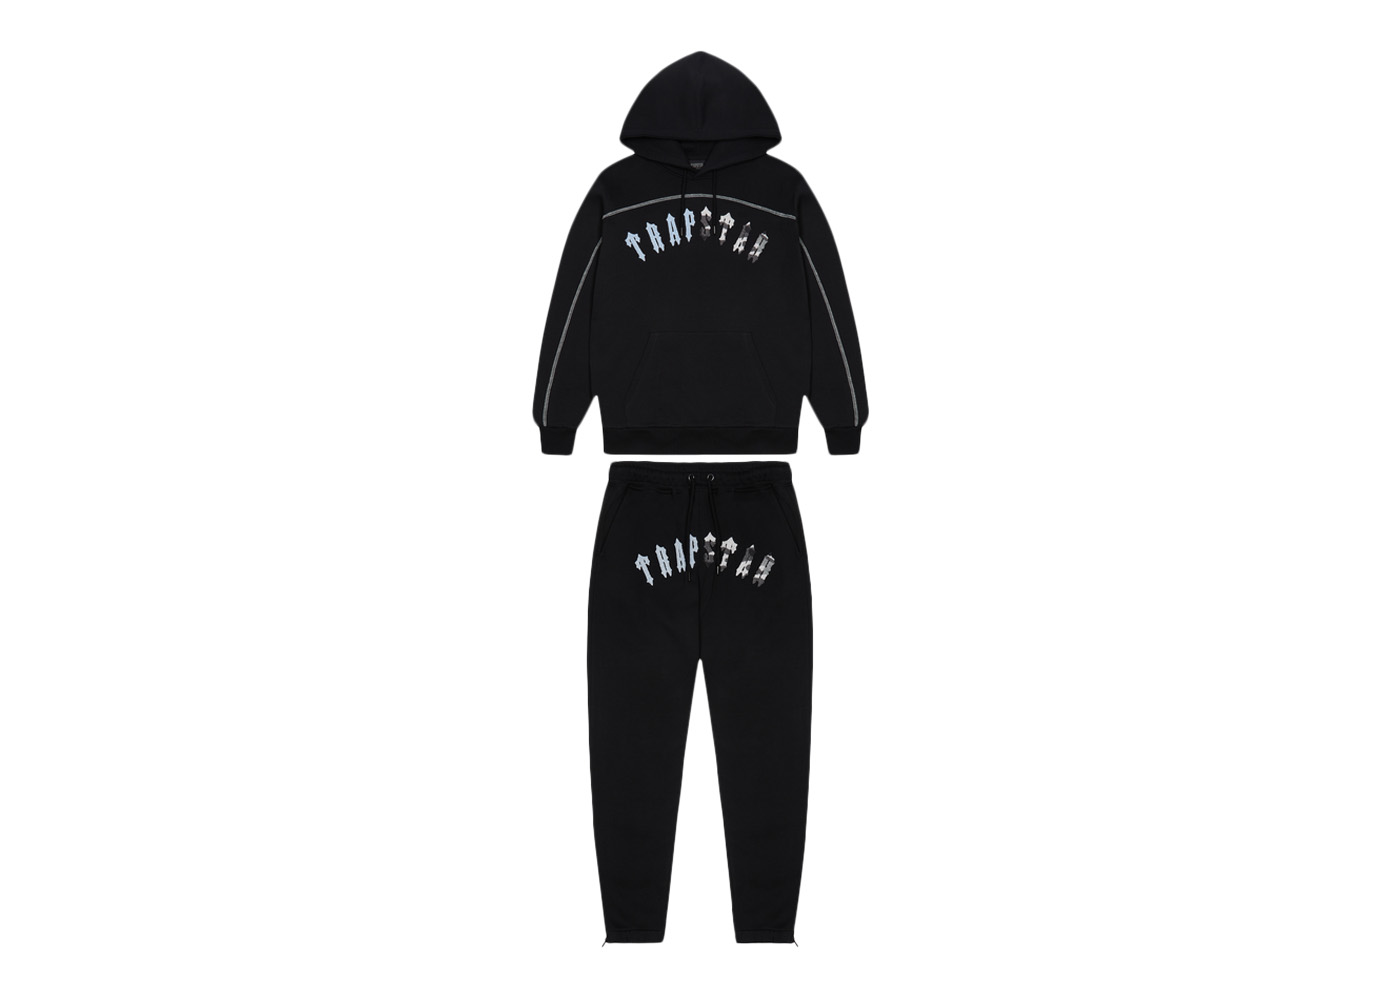 Trapstar Irongate Chenille Arch Hooded Tracksuit Grey/Sea Blue 